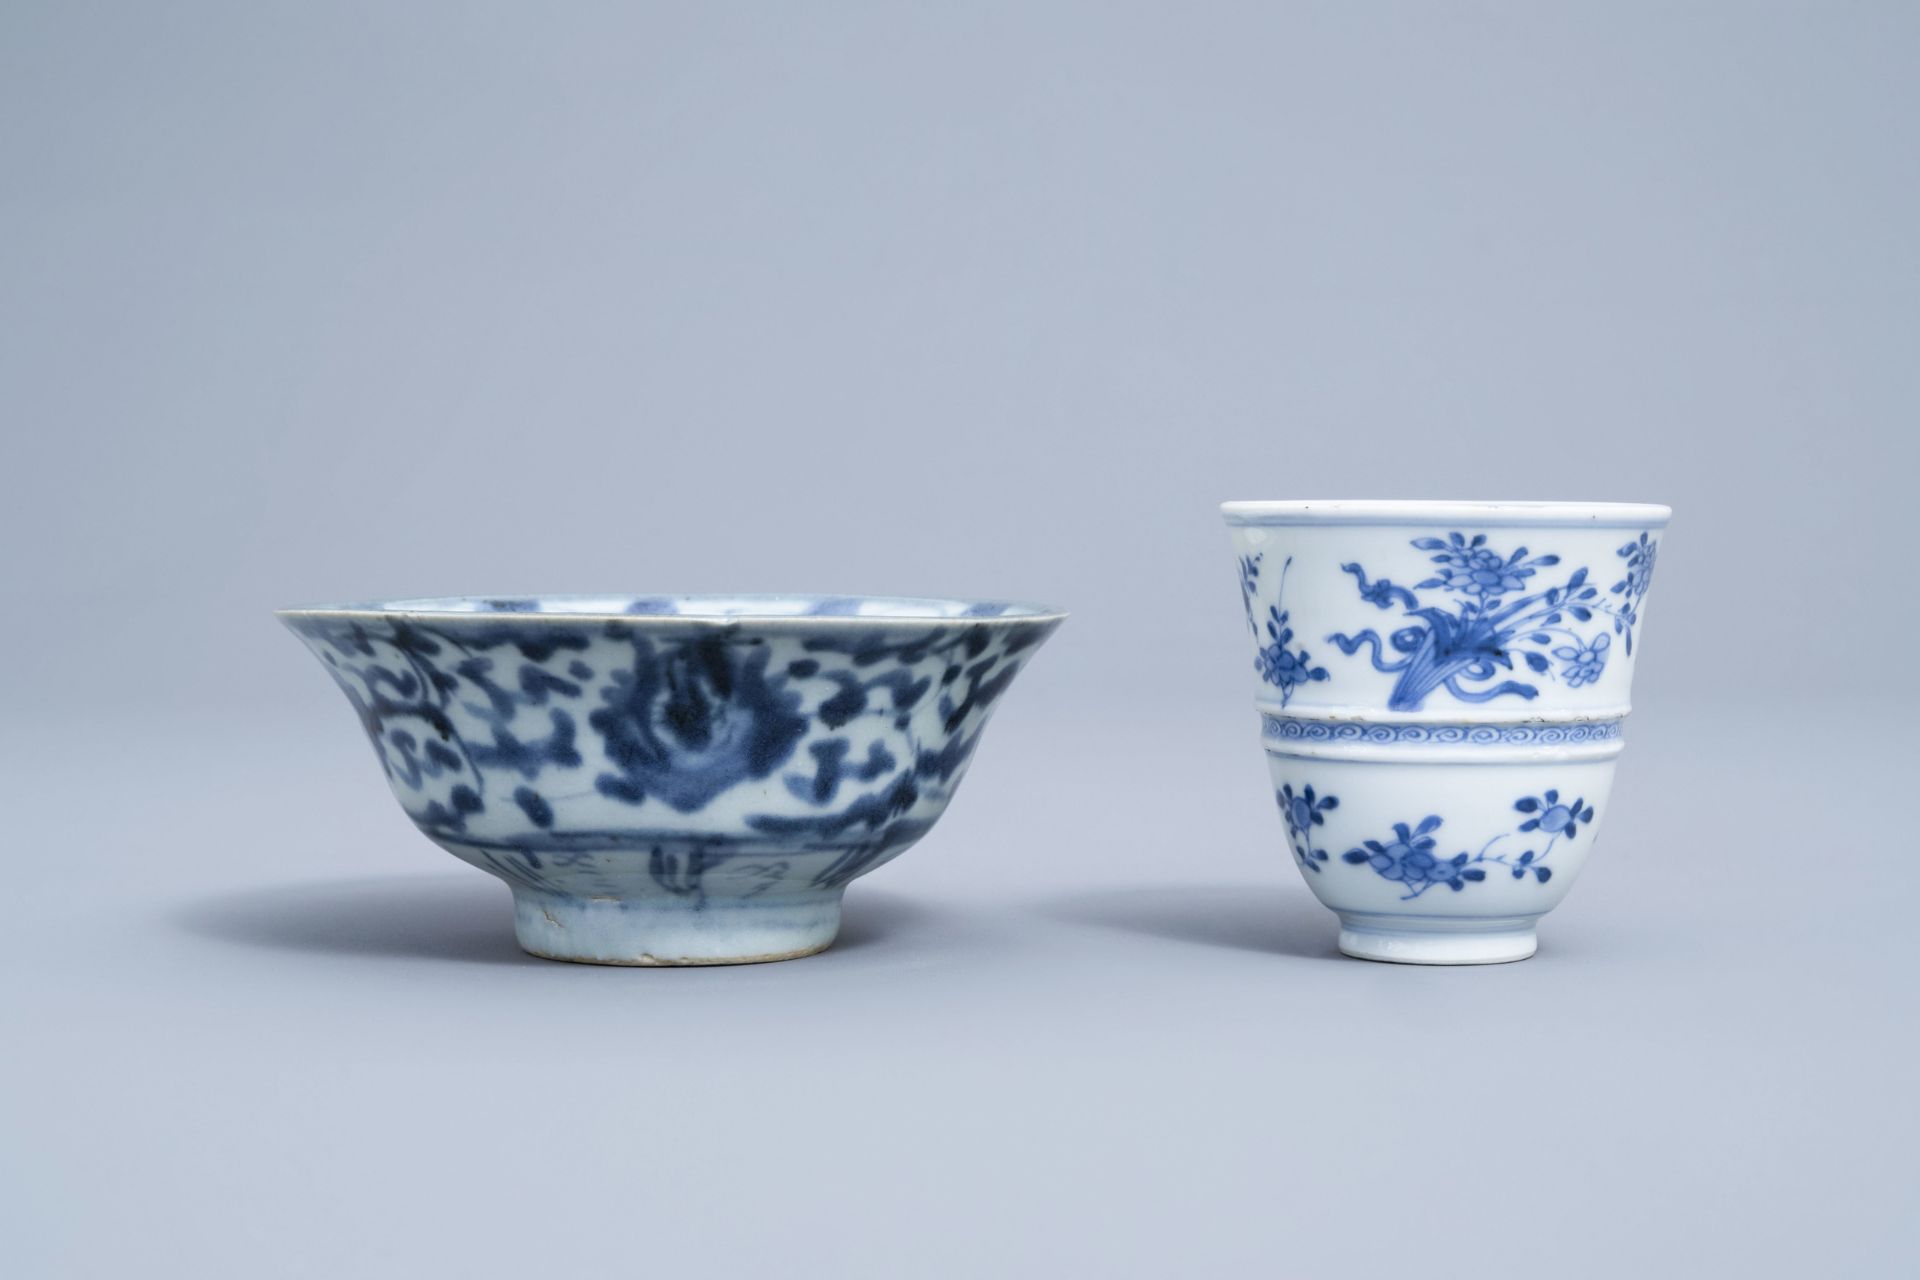 A varied collection of Chinese blue and white porcelain, 18th C. and later - Image 20 of 54